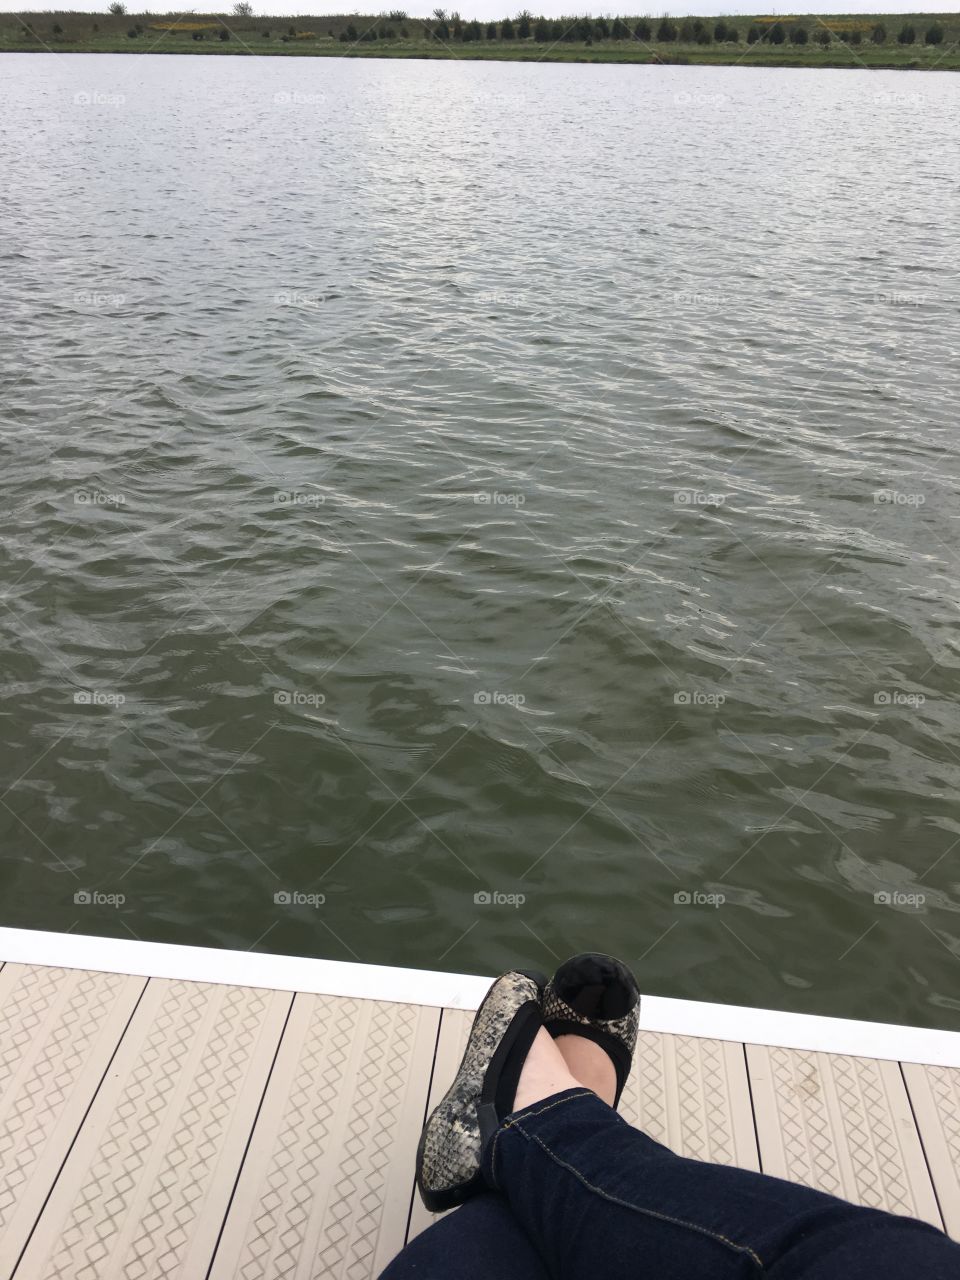 Sitting by the lake